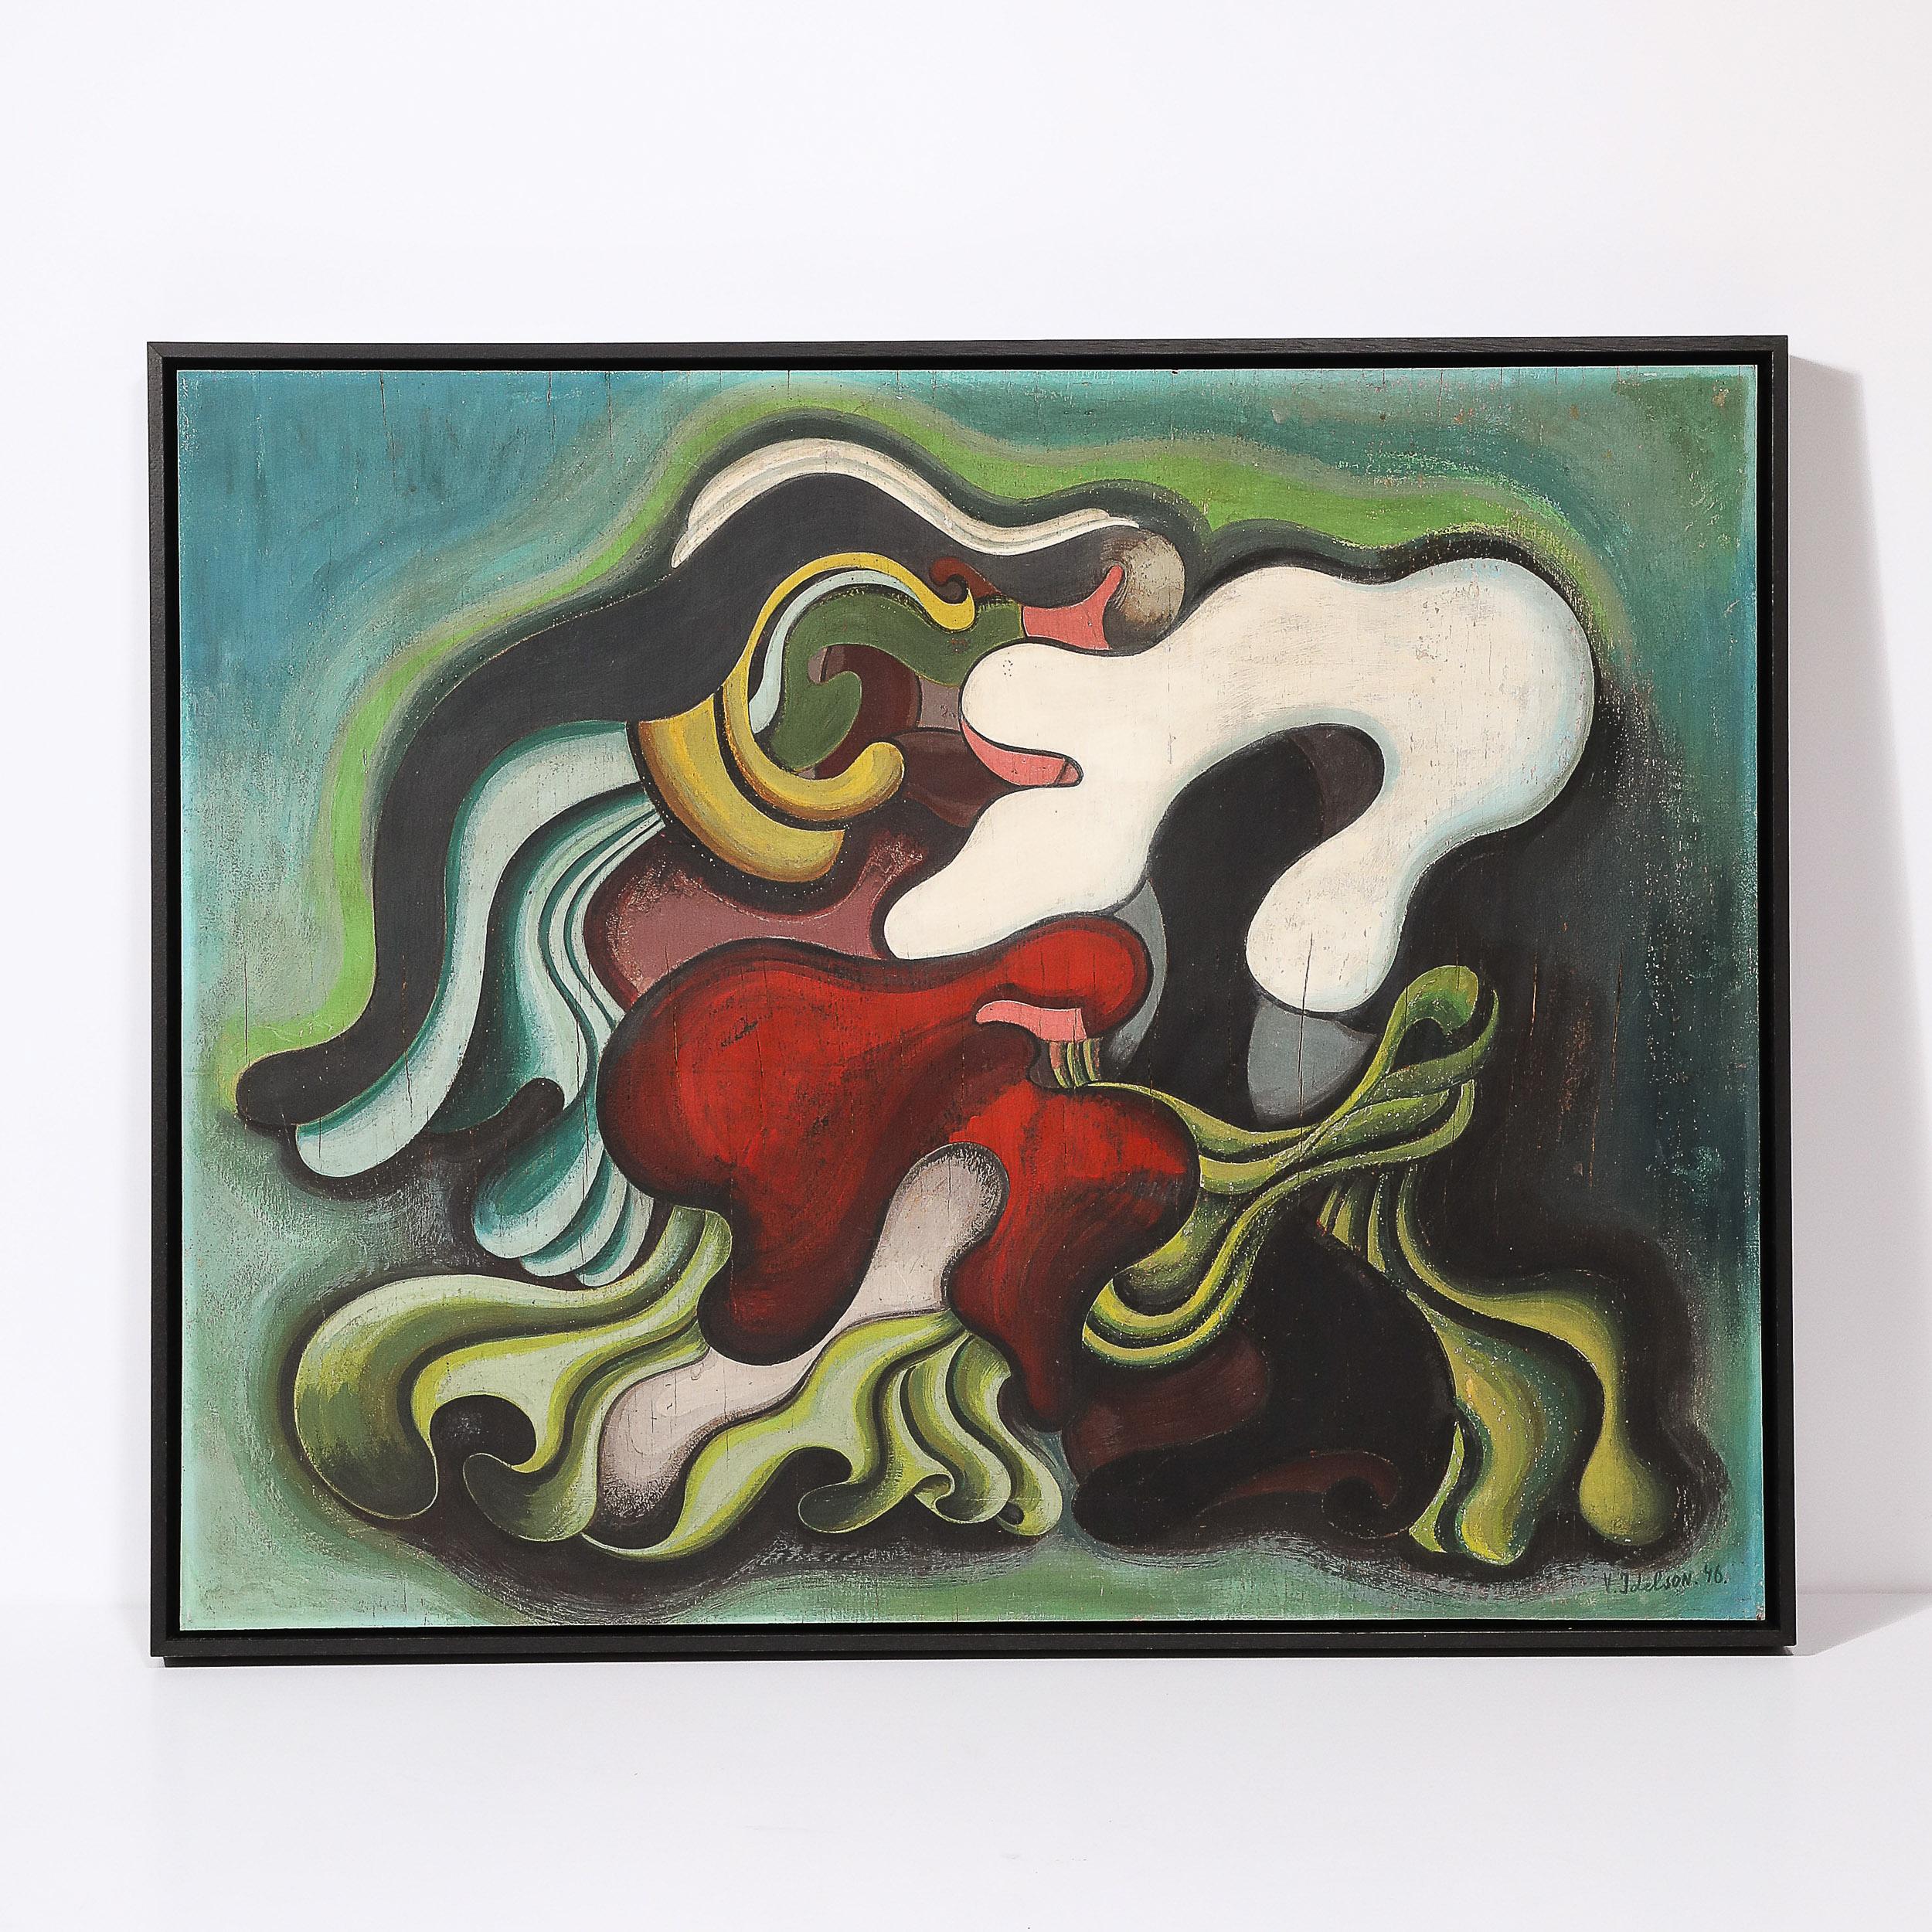 This strikingly etherial Mid-Century Modernist Vera Idelson 'Composition Biomorphique' Tempera on masonite  Painting originates from Israel, created in 1946. A unique and gorgeous piece, the painting consists of a amorphous form in the center of the